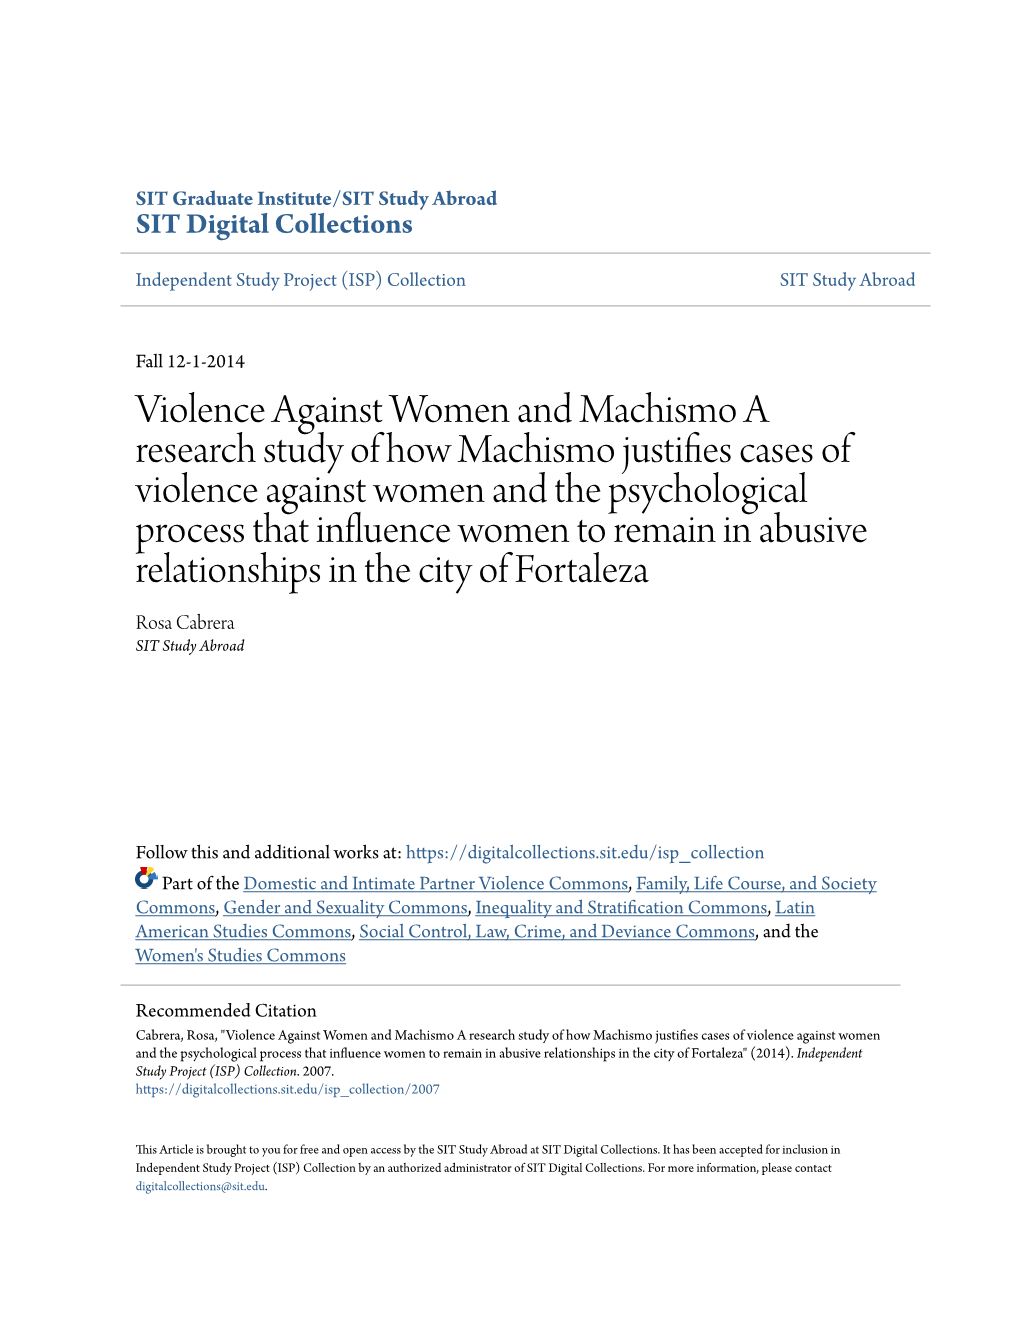 Violence Against Women and Machismo